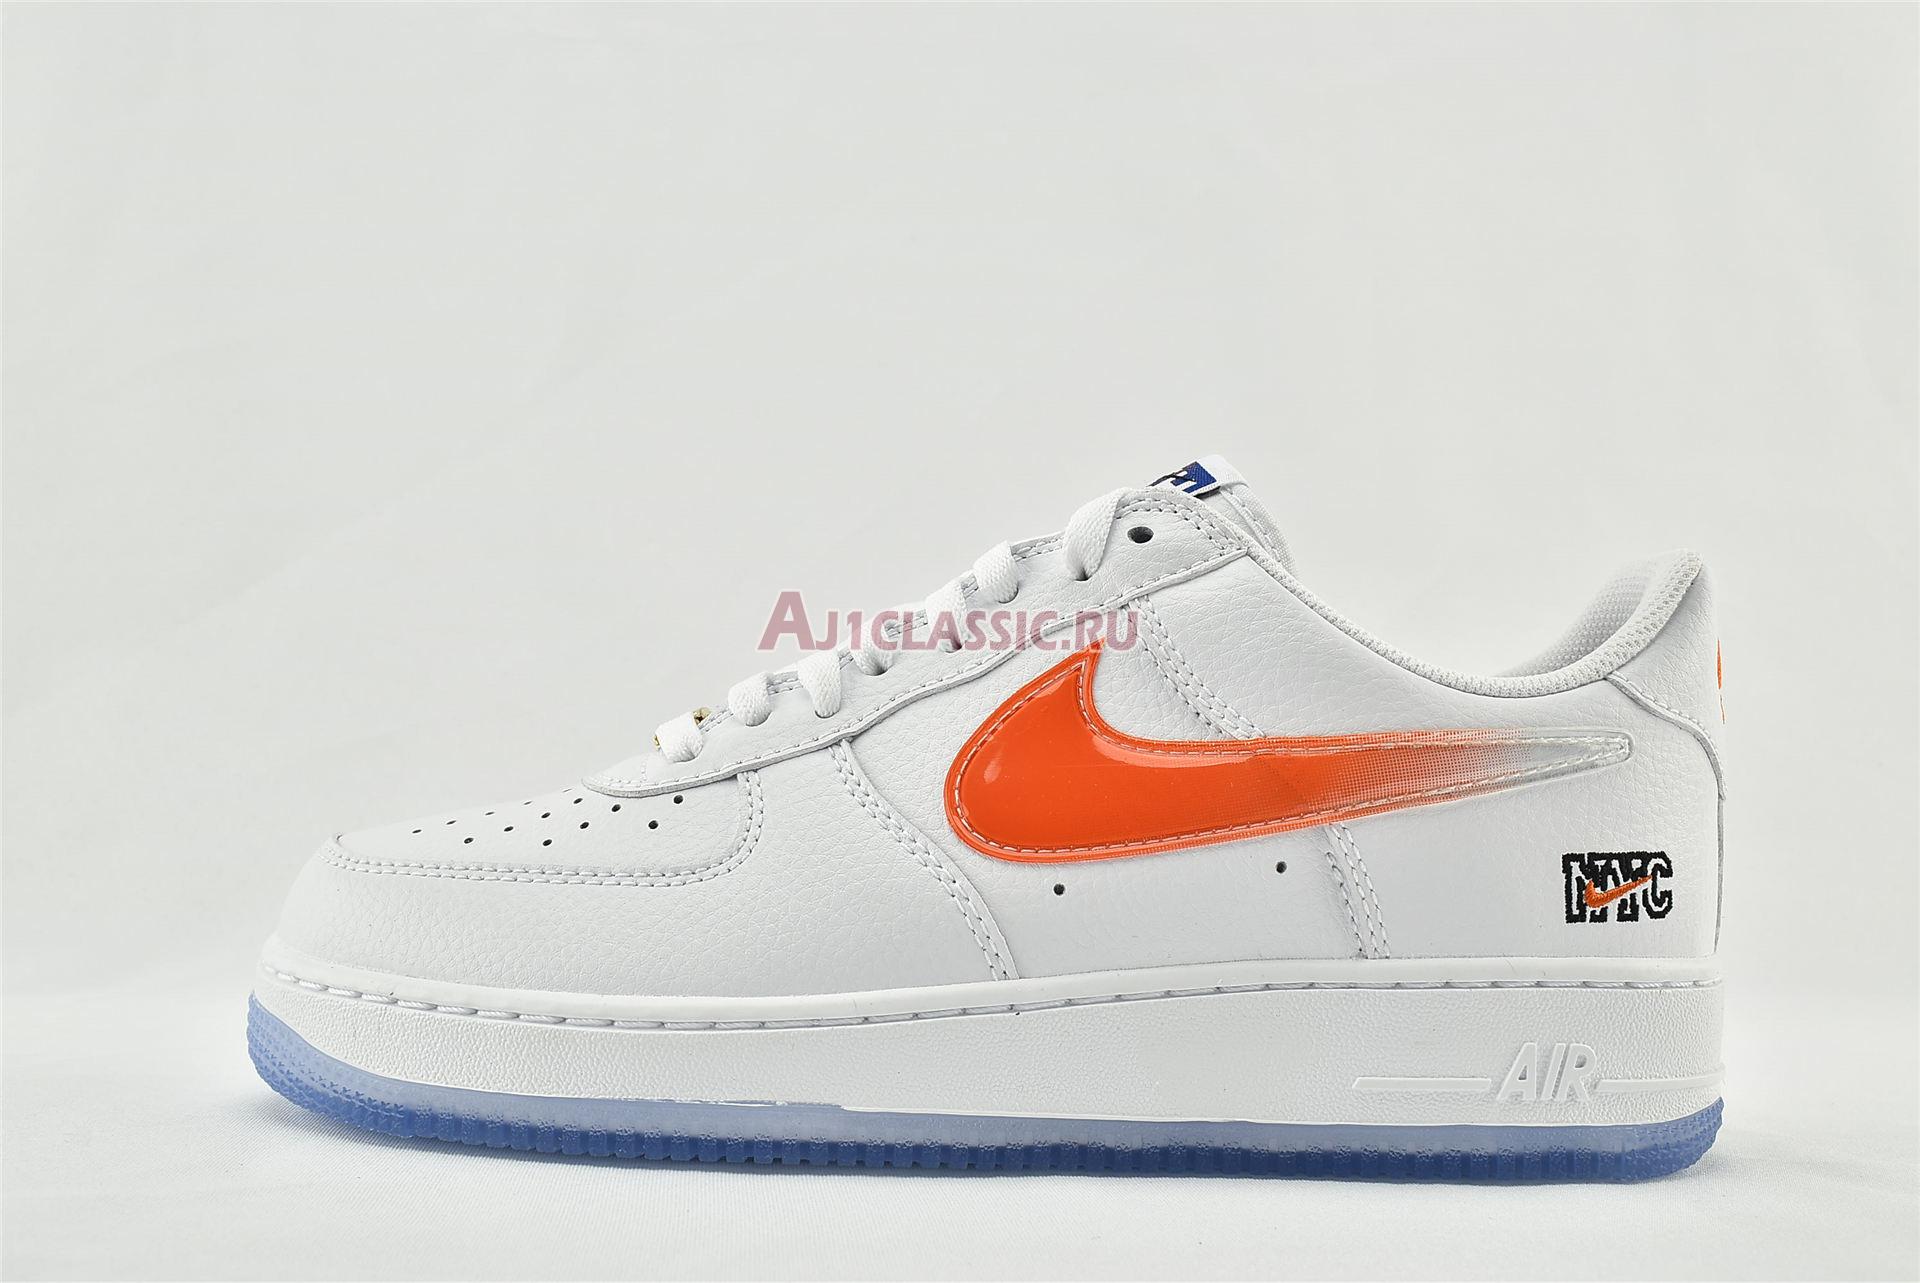 Kith x Nike Air Force 1 Low "NYC - White" CZ7928-100